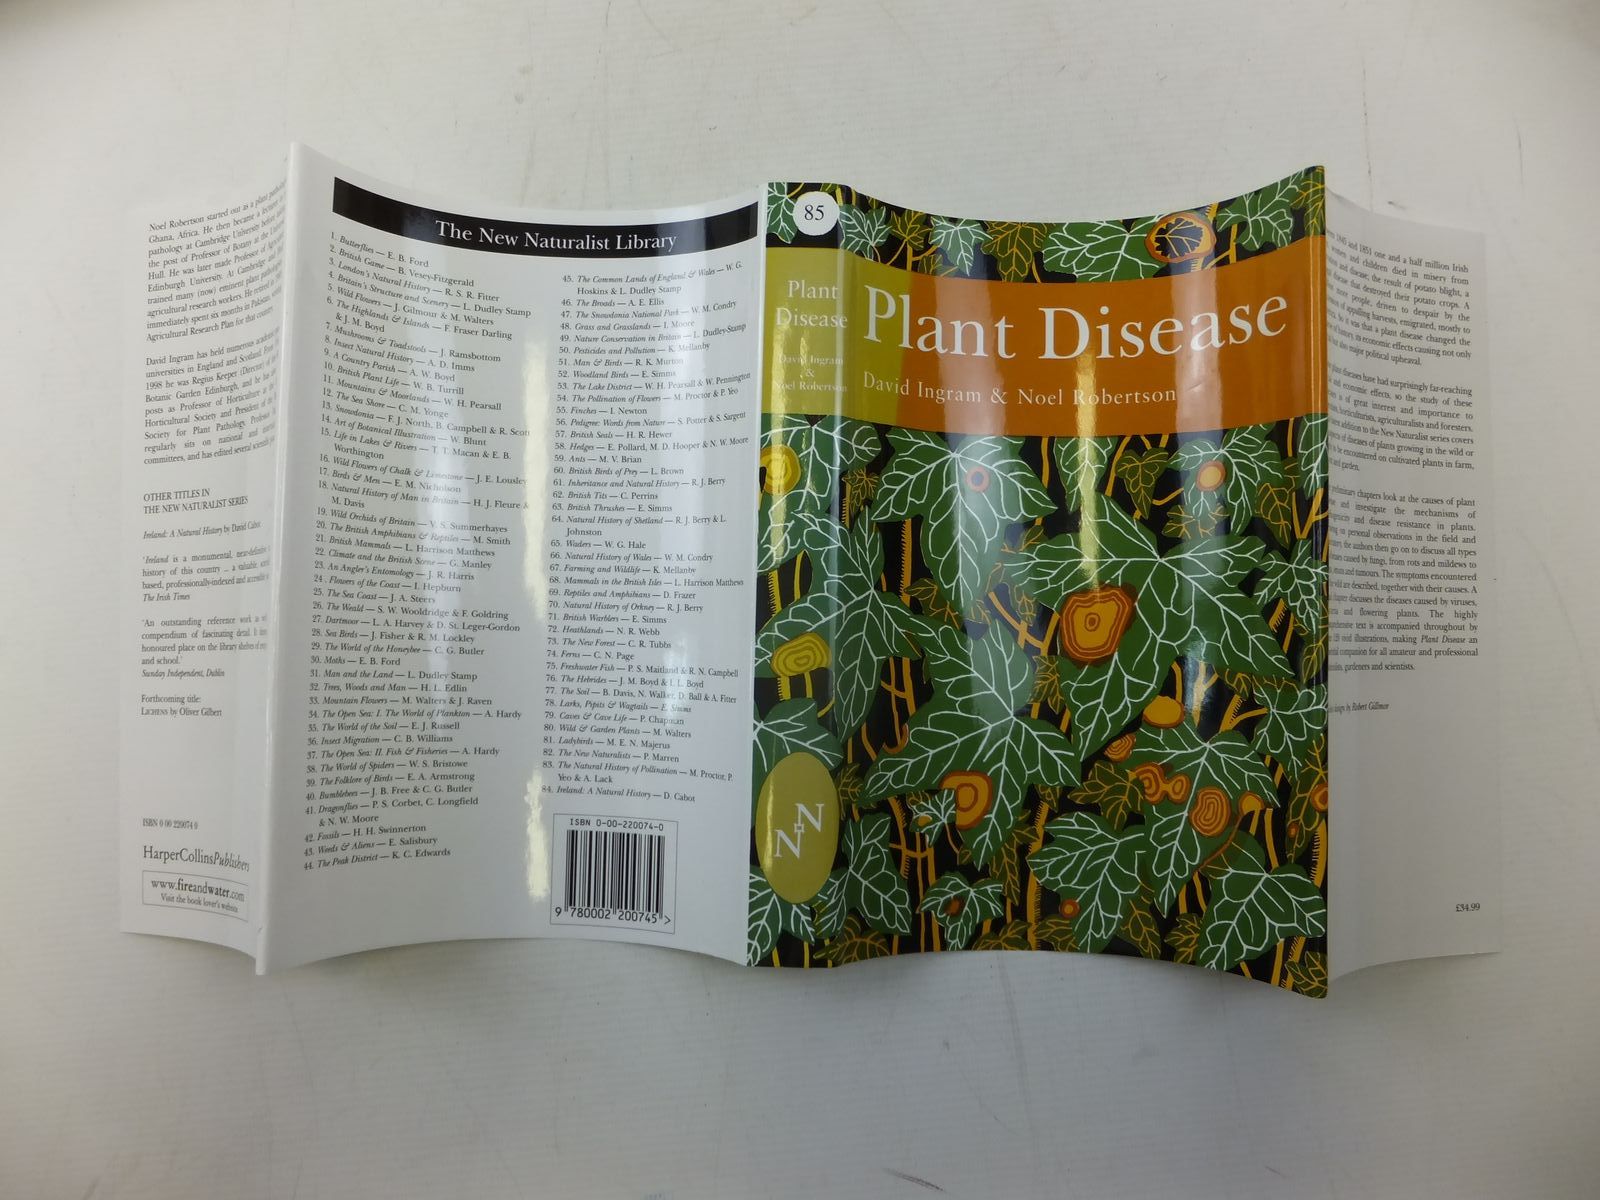 Photo of PLANT DISEASE A NATURAL HISTORY (NN 85) written by Ingram, David
Robertson, Noel published by Harper Collins (STOCK CODE: 2116240)  for sale by Stella & Rose's Books